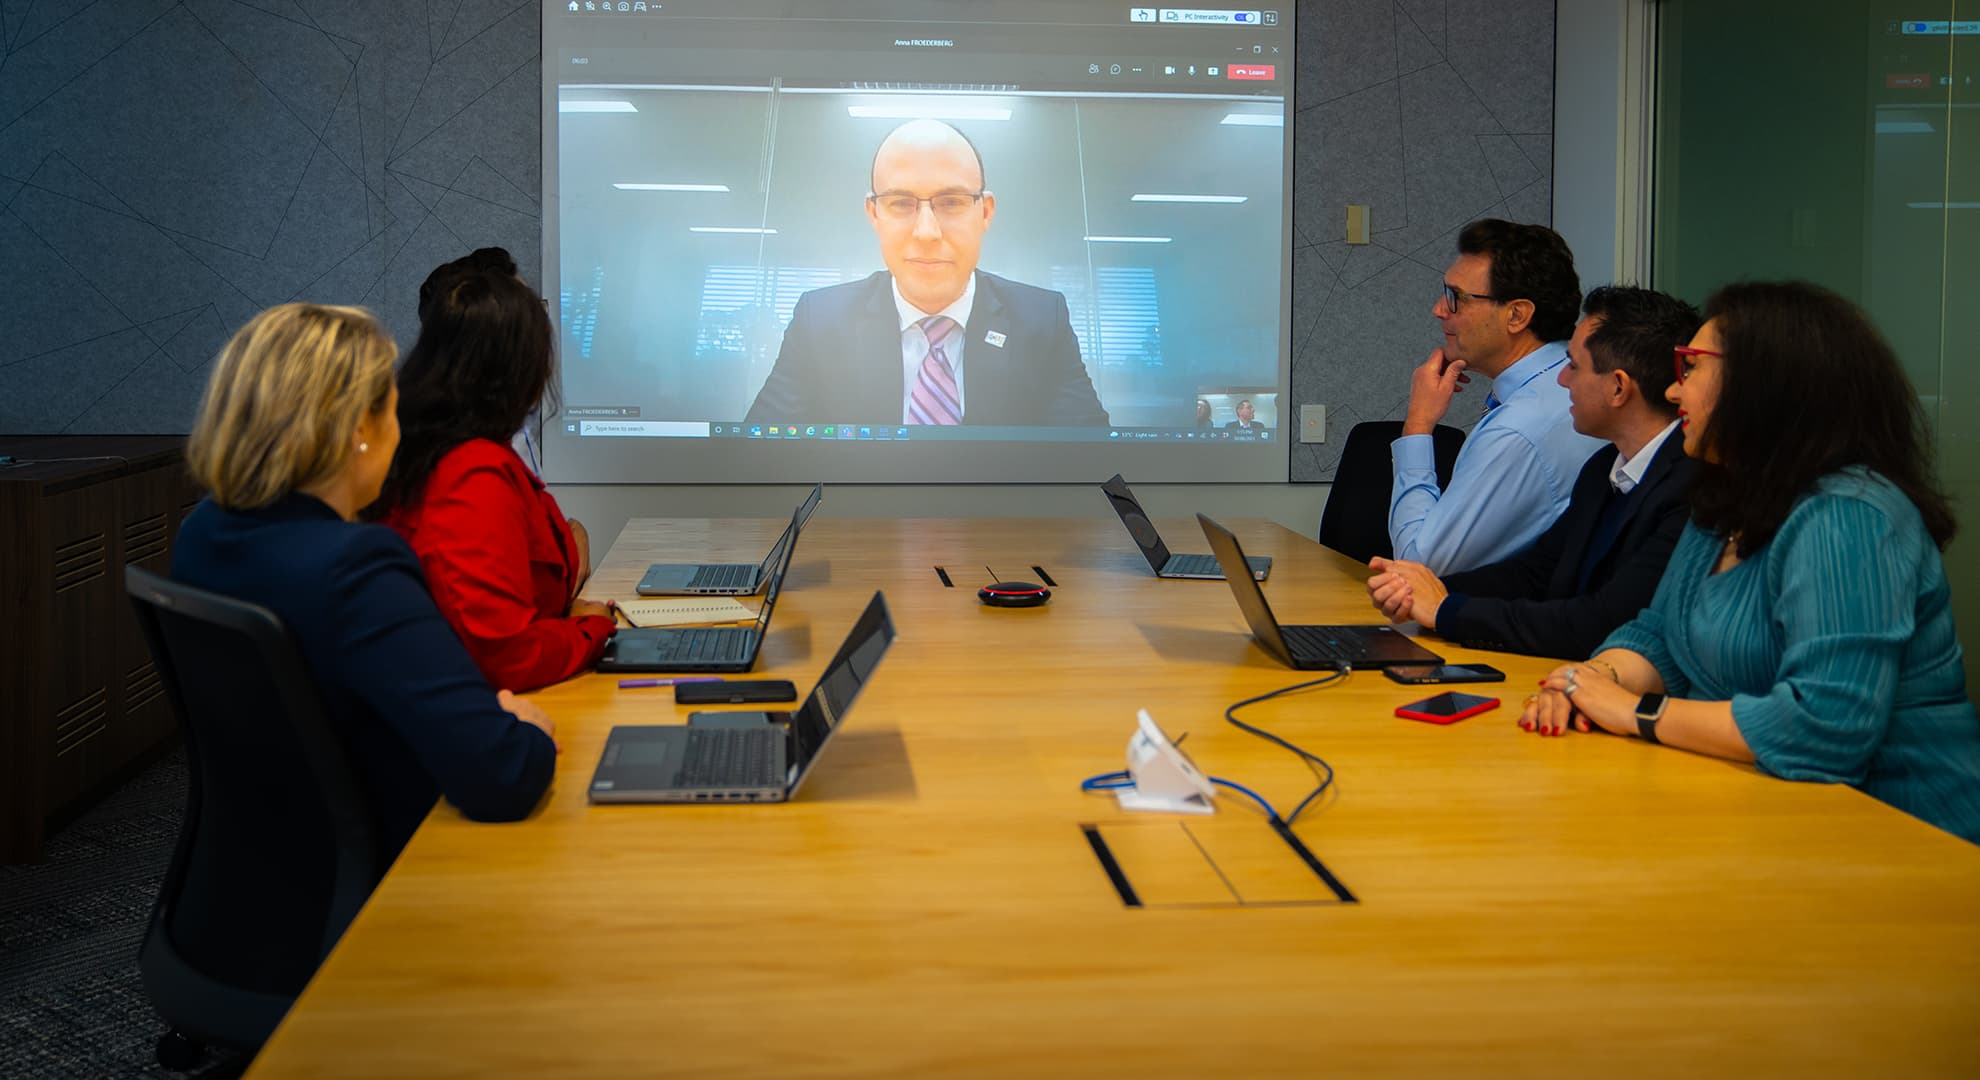 Centre for Work and Wellbeing on a video call in a conference room.